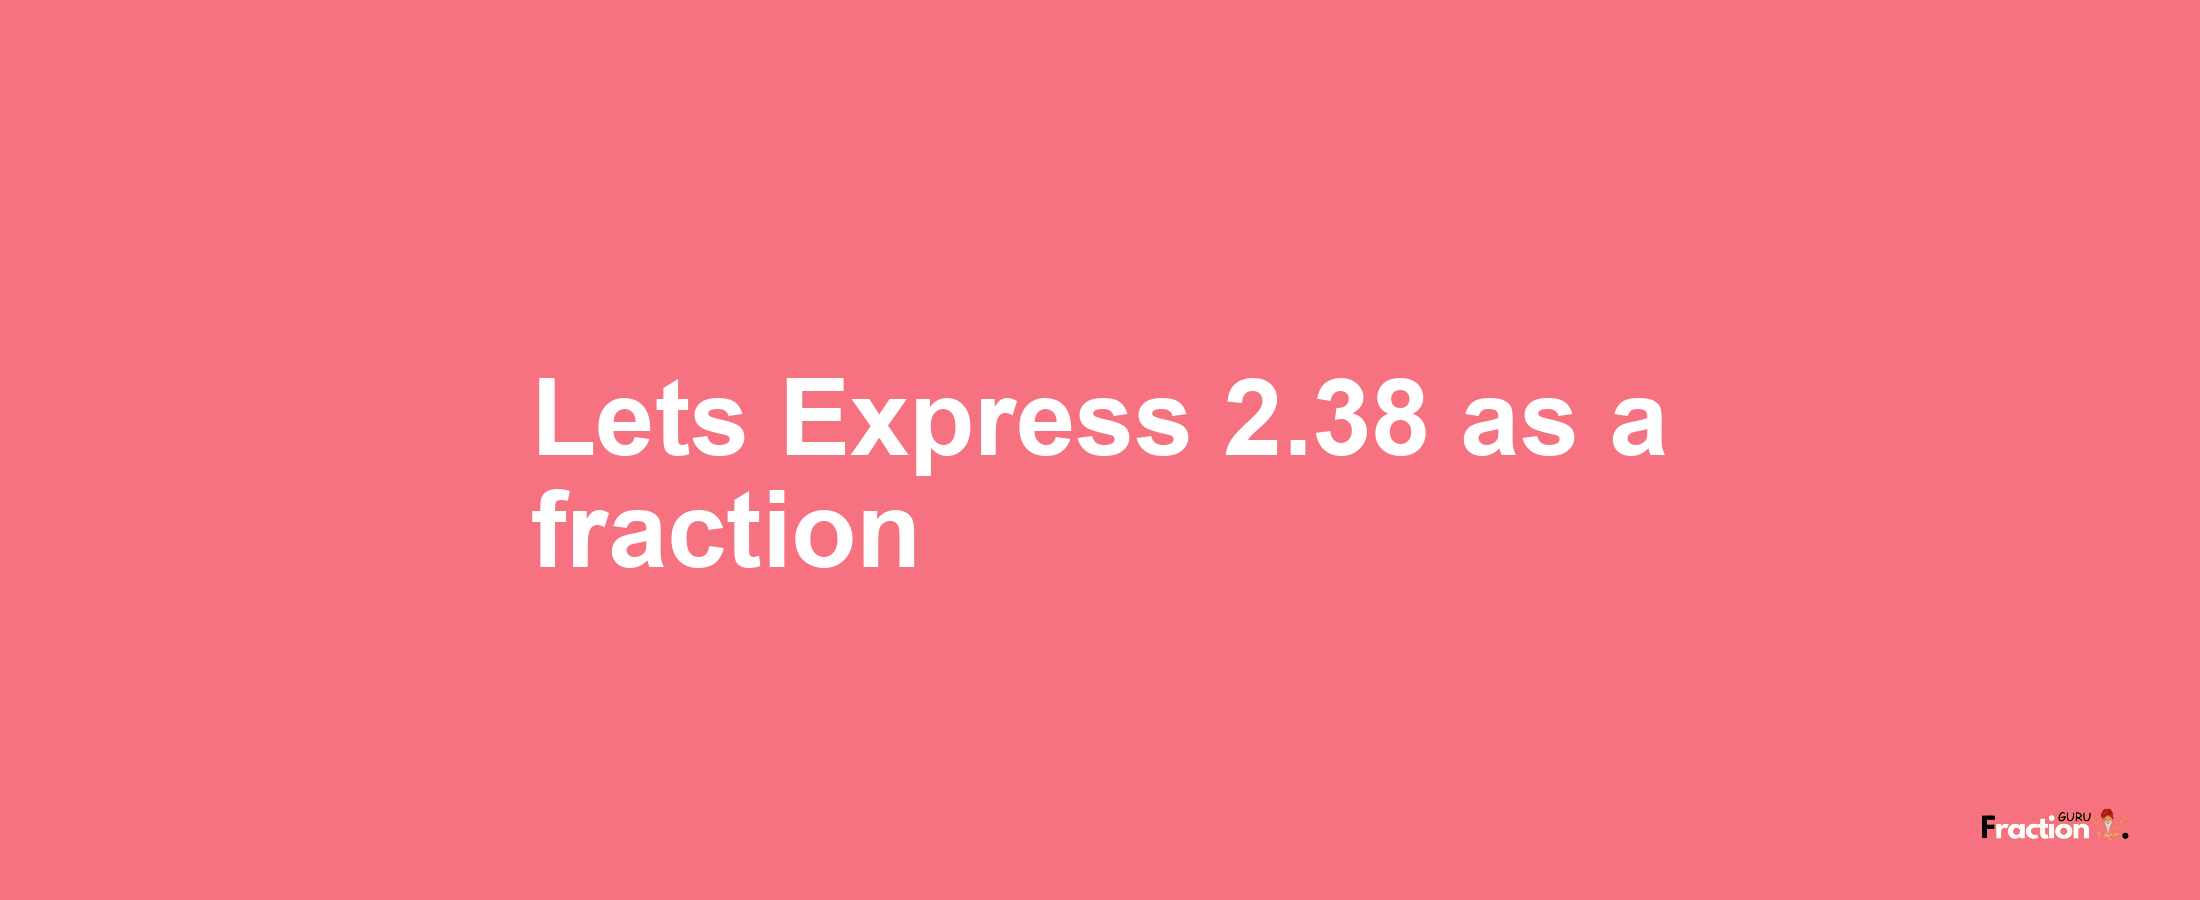 Lets Express 2.38 as afraction